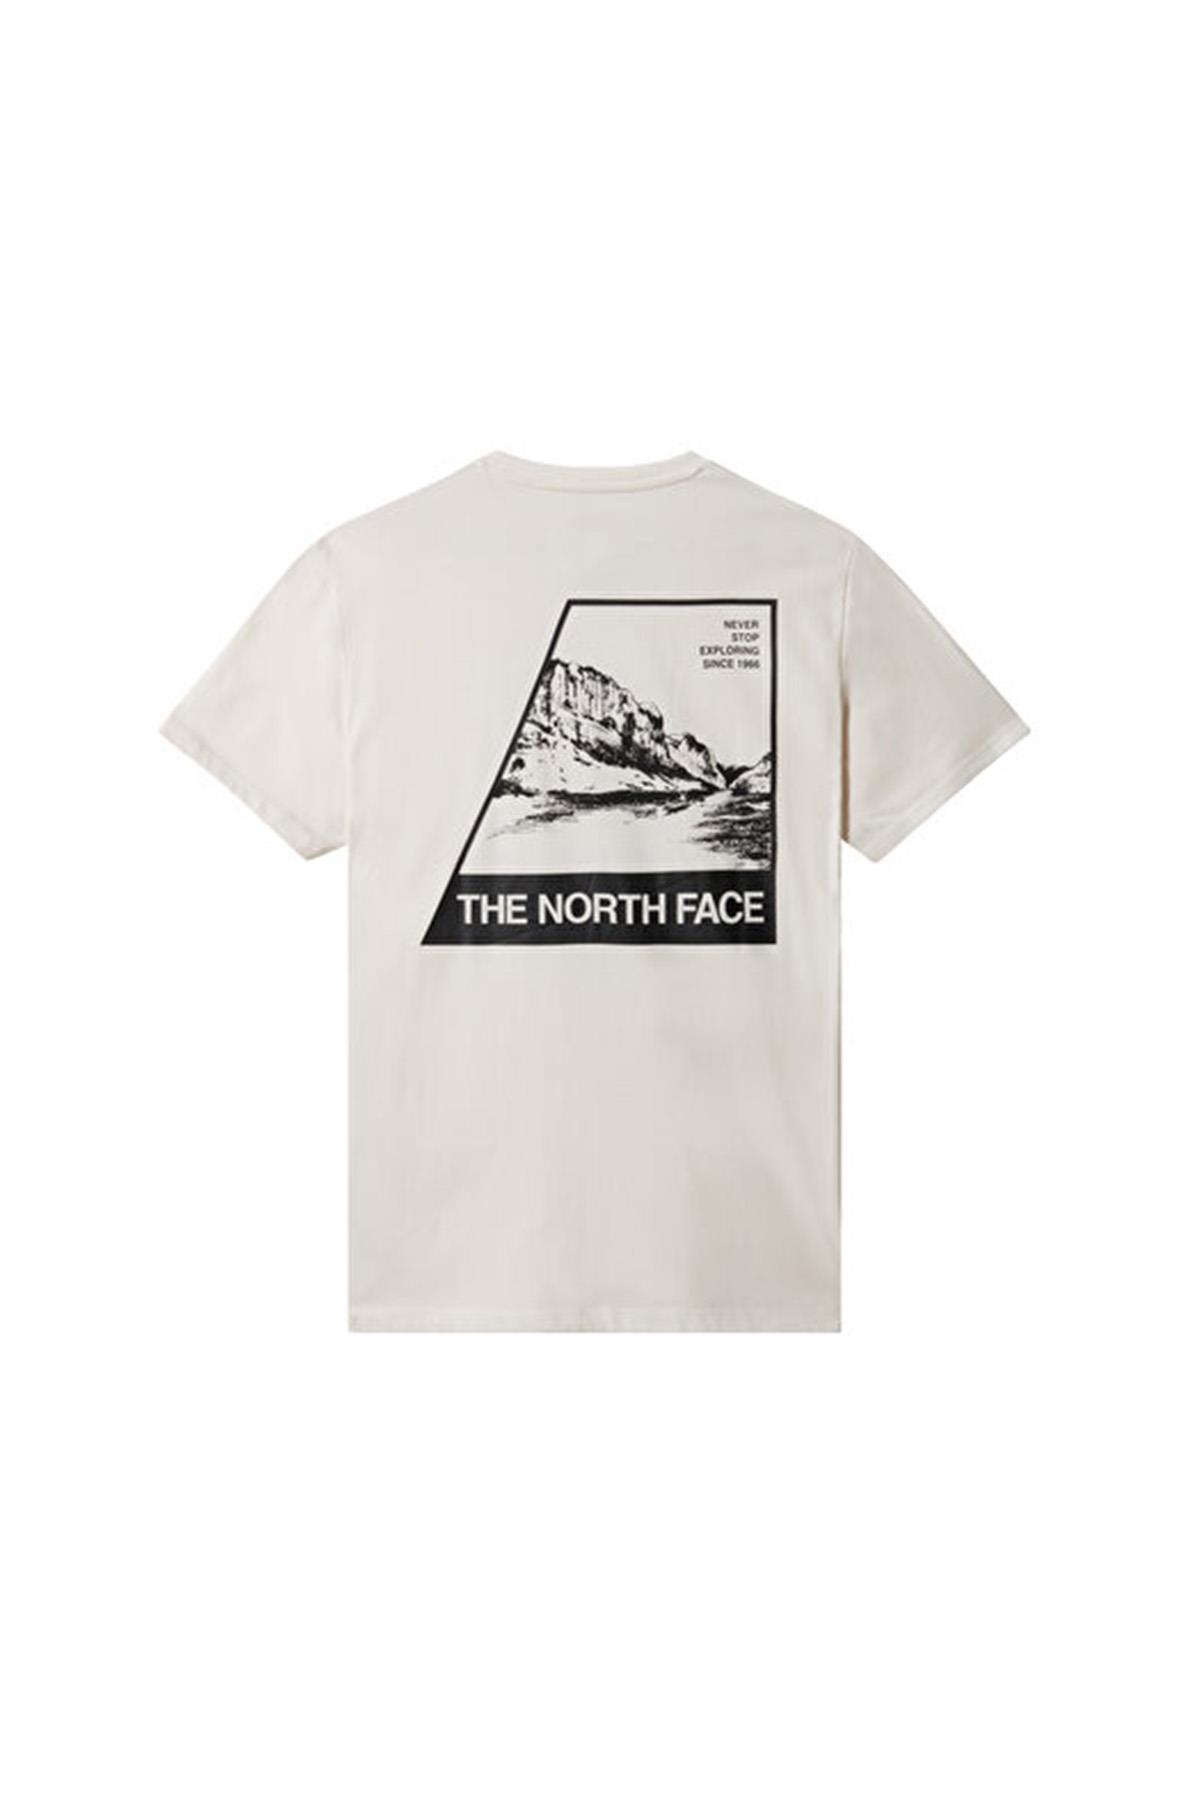  The North Face M FOUNDATION GRAPHIC TEE S/S - EU T-Shirt  NF0A55EFN3N1